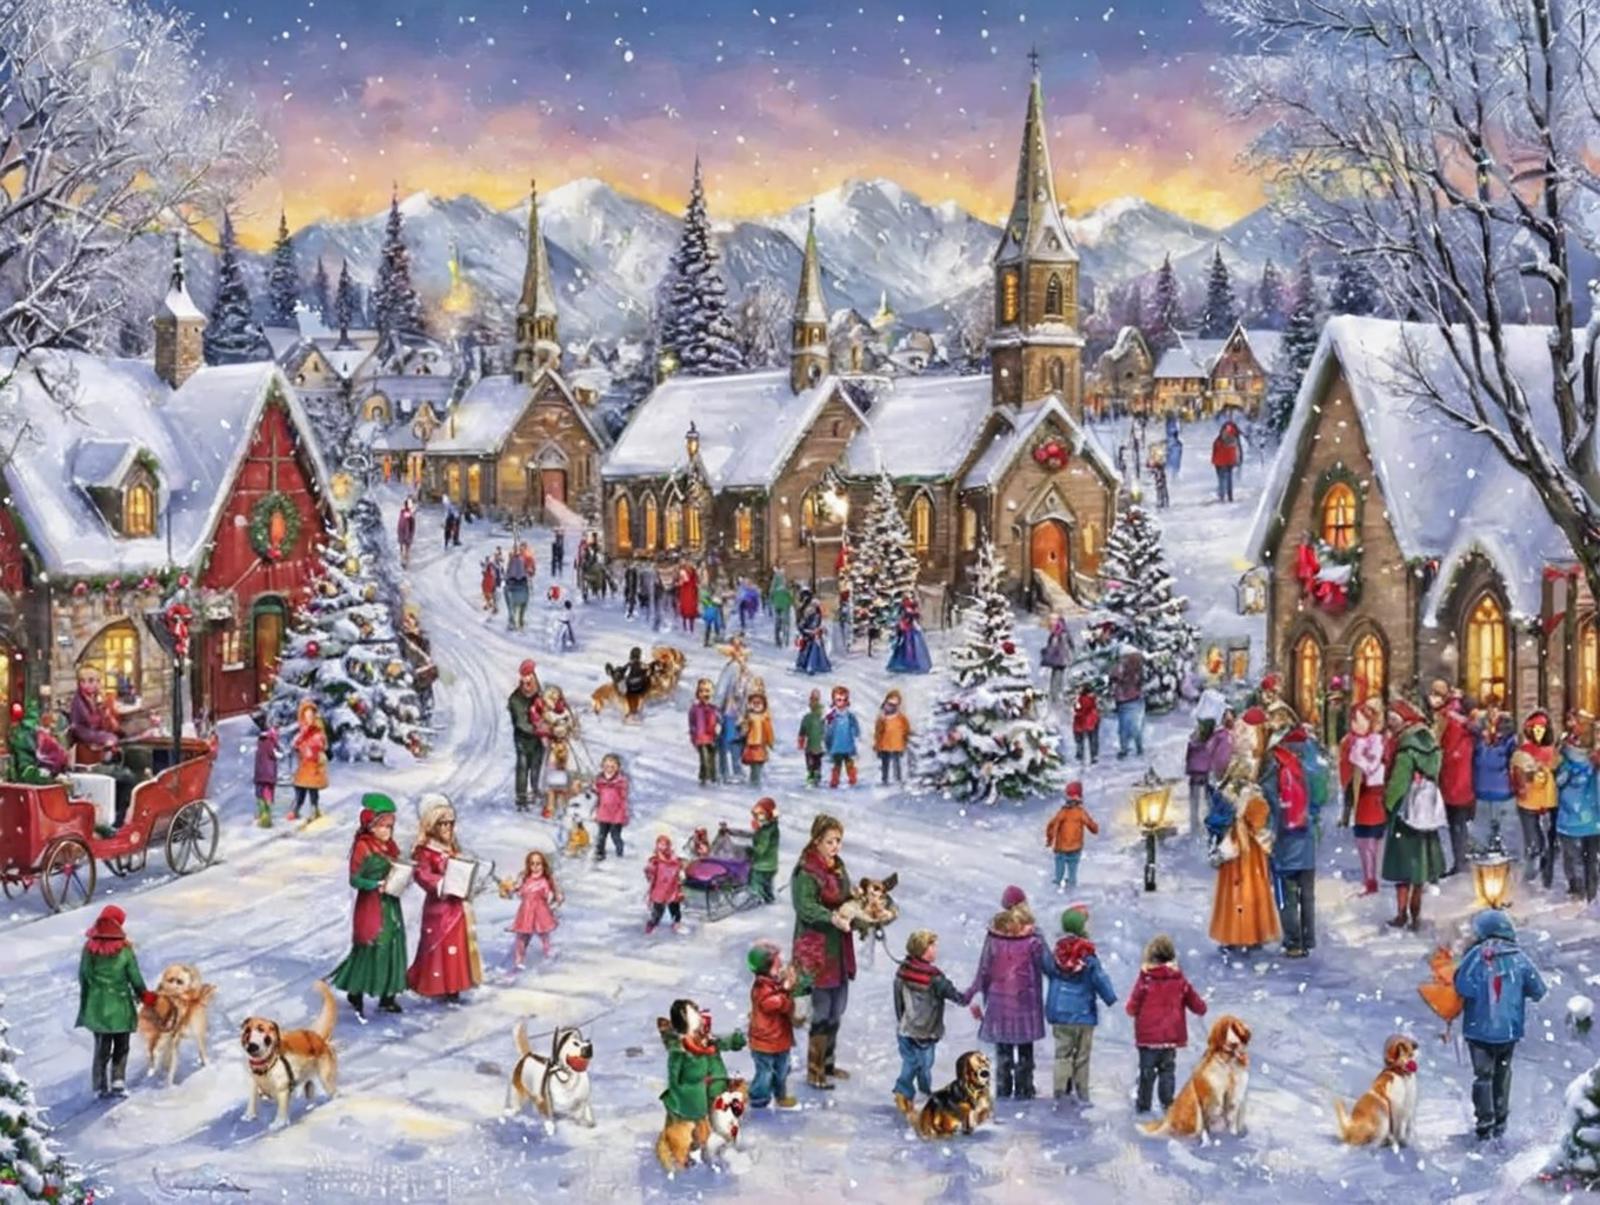 A Christmas painting of a snow-covered village with people and dogs.